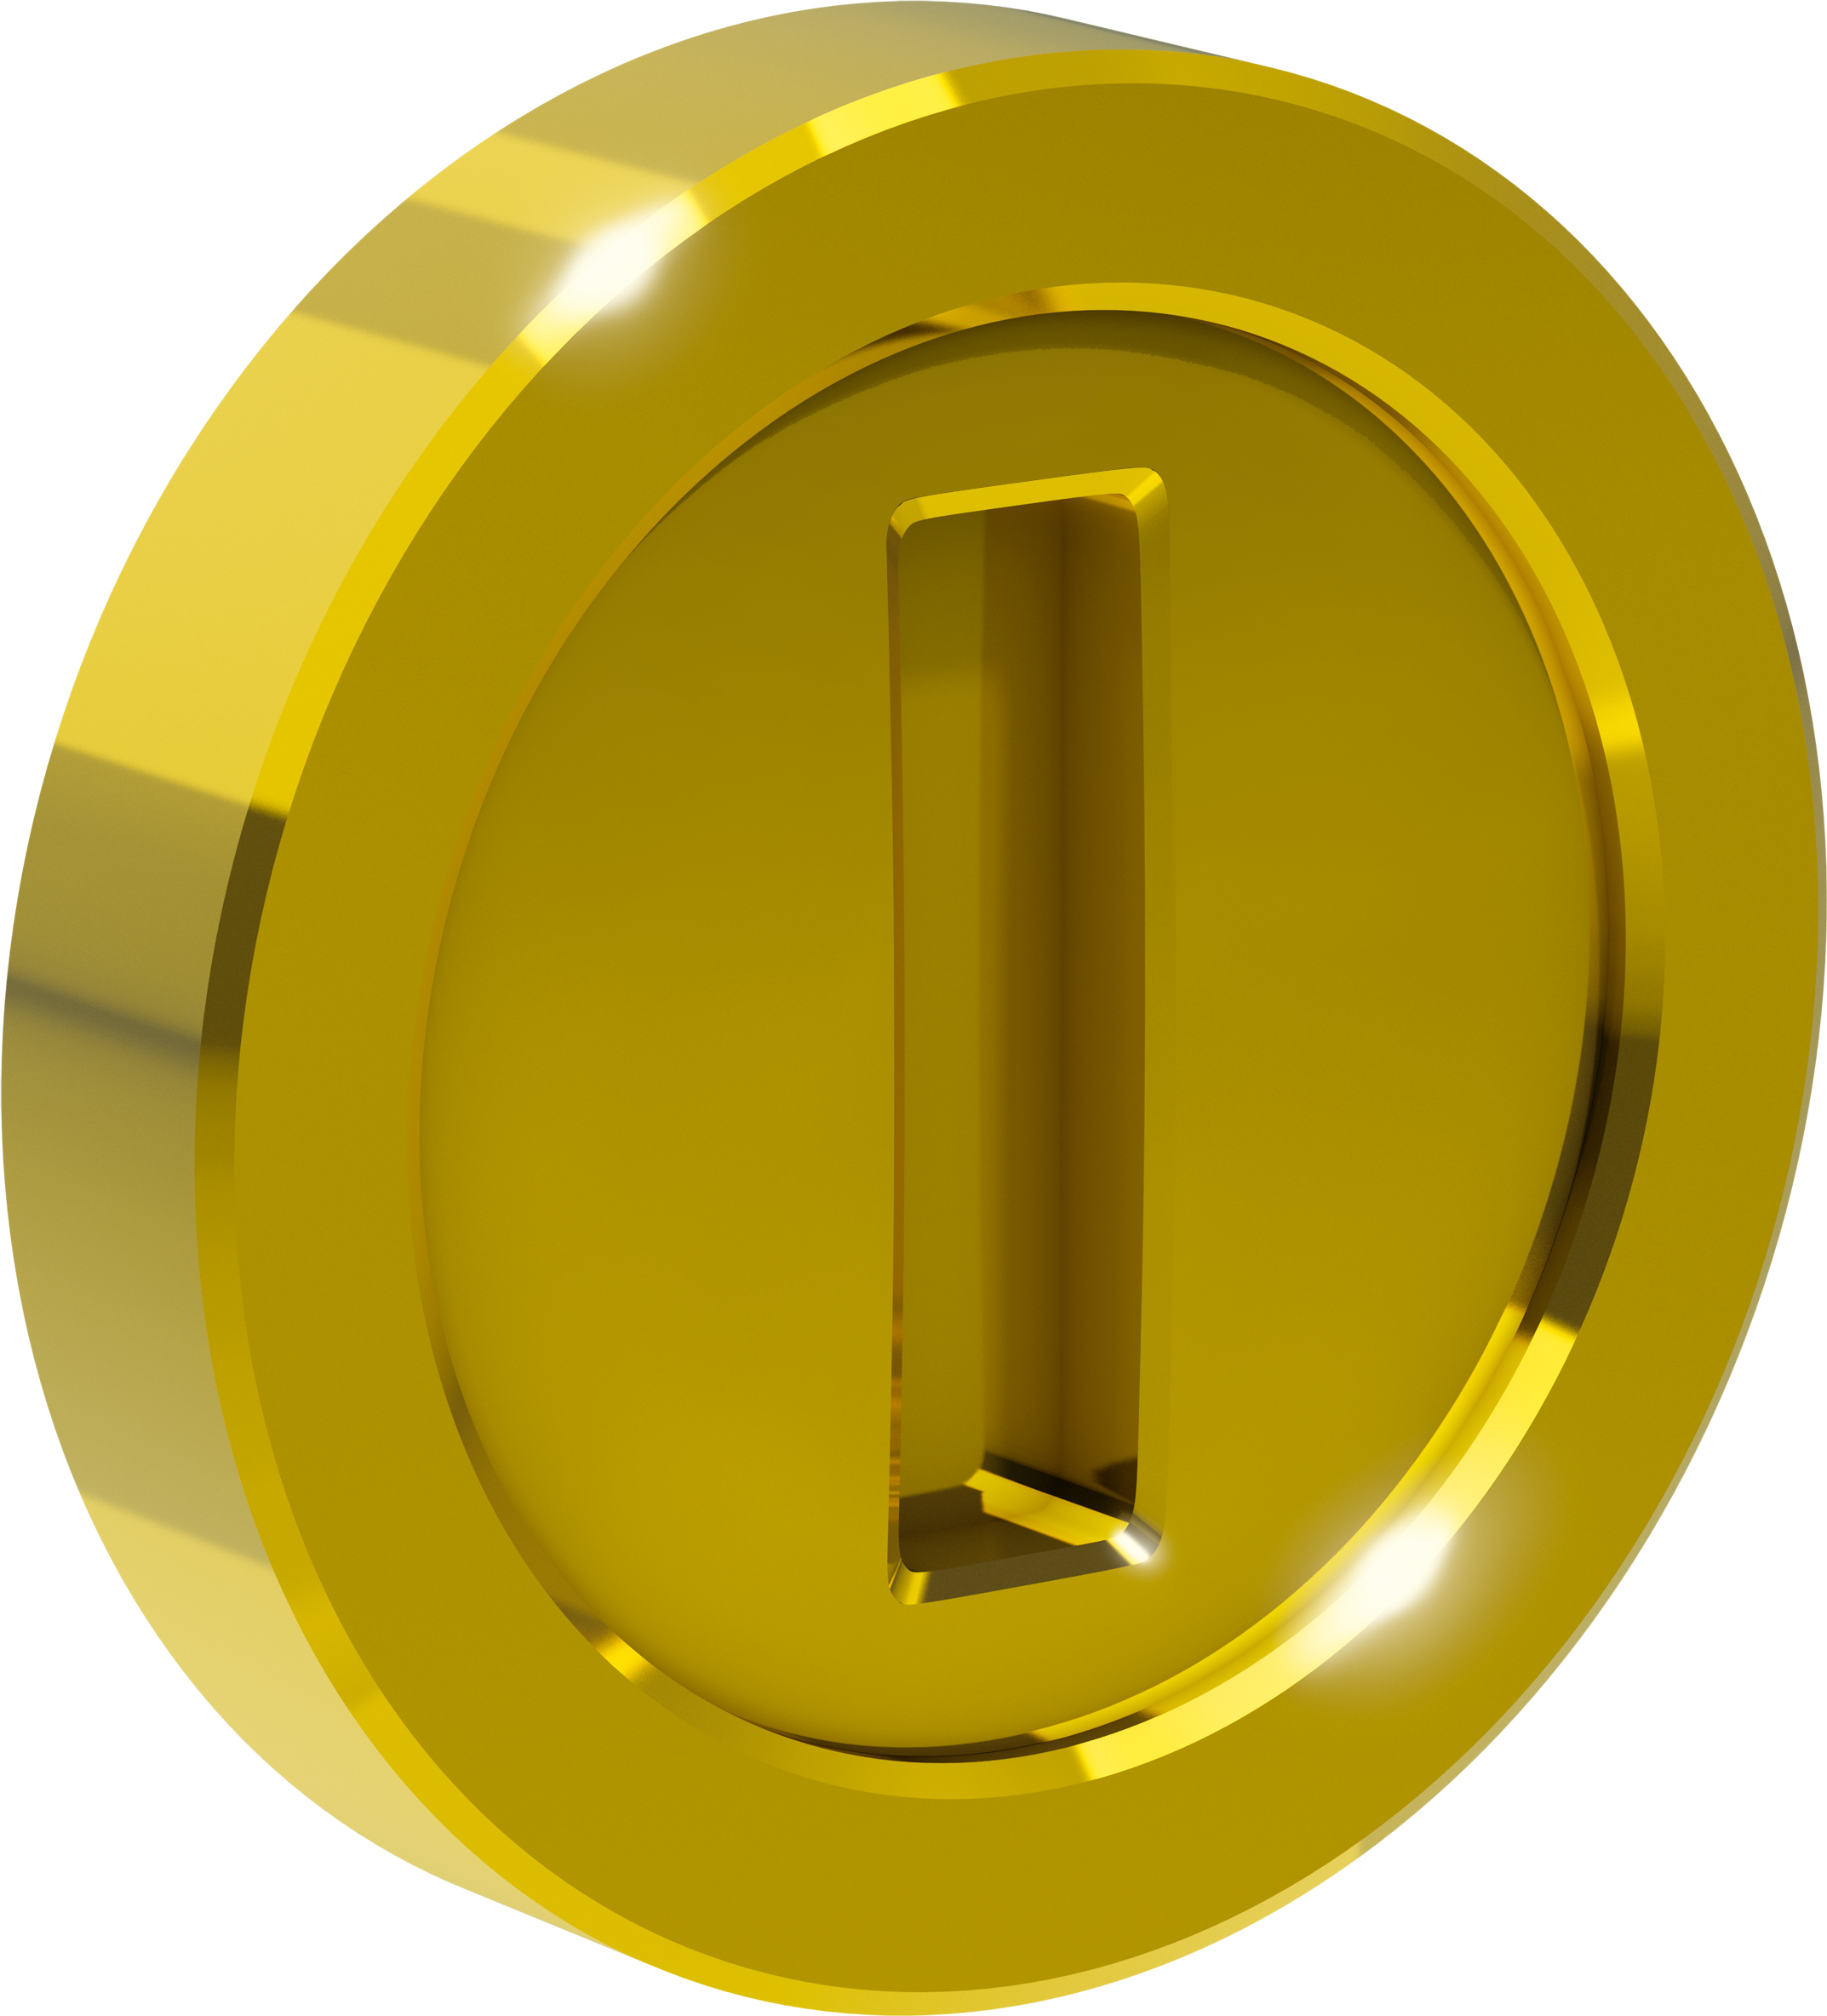 Game Gold Coin PNG High Quality Image